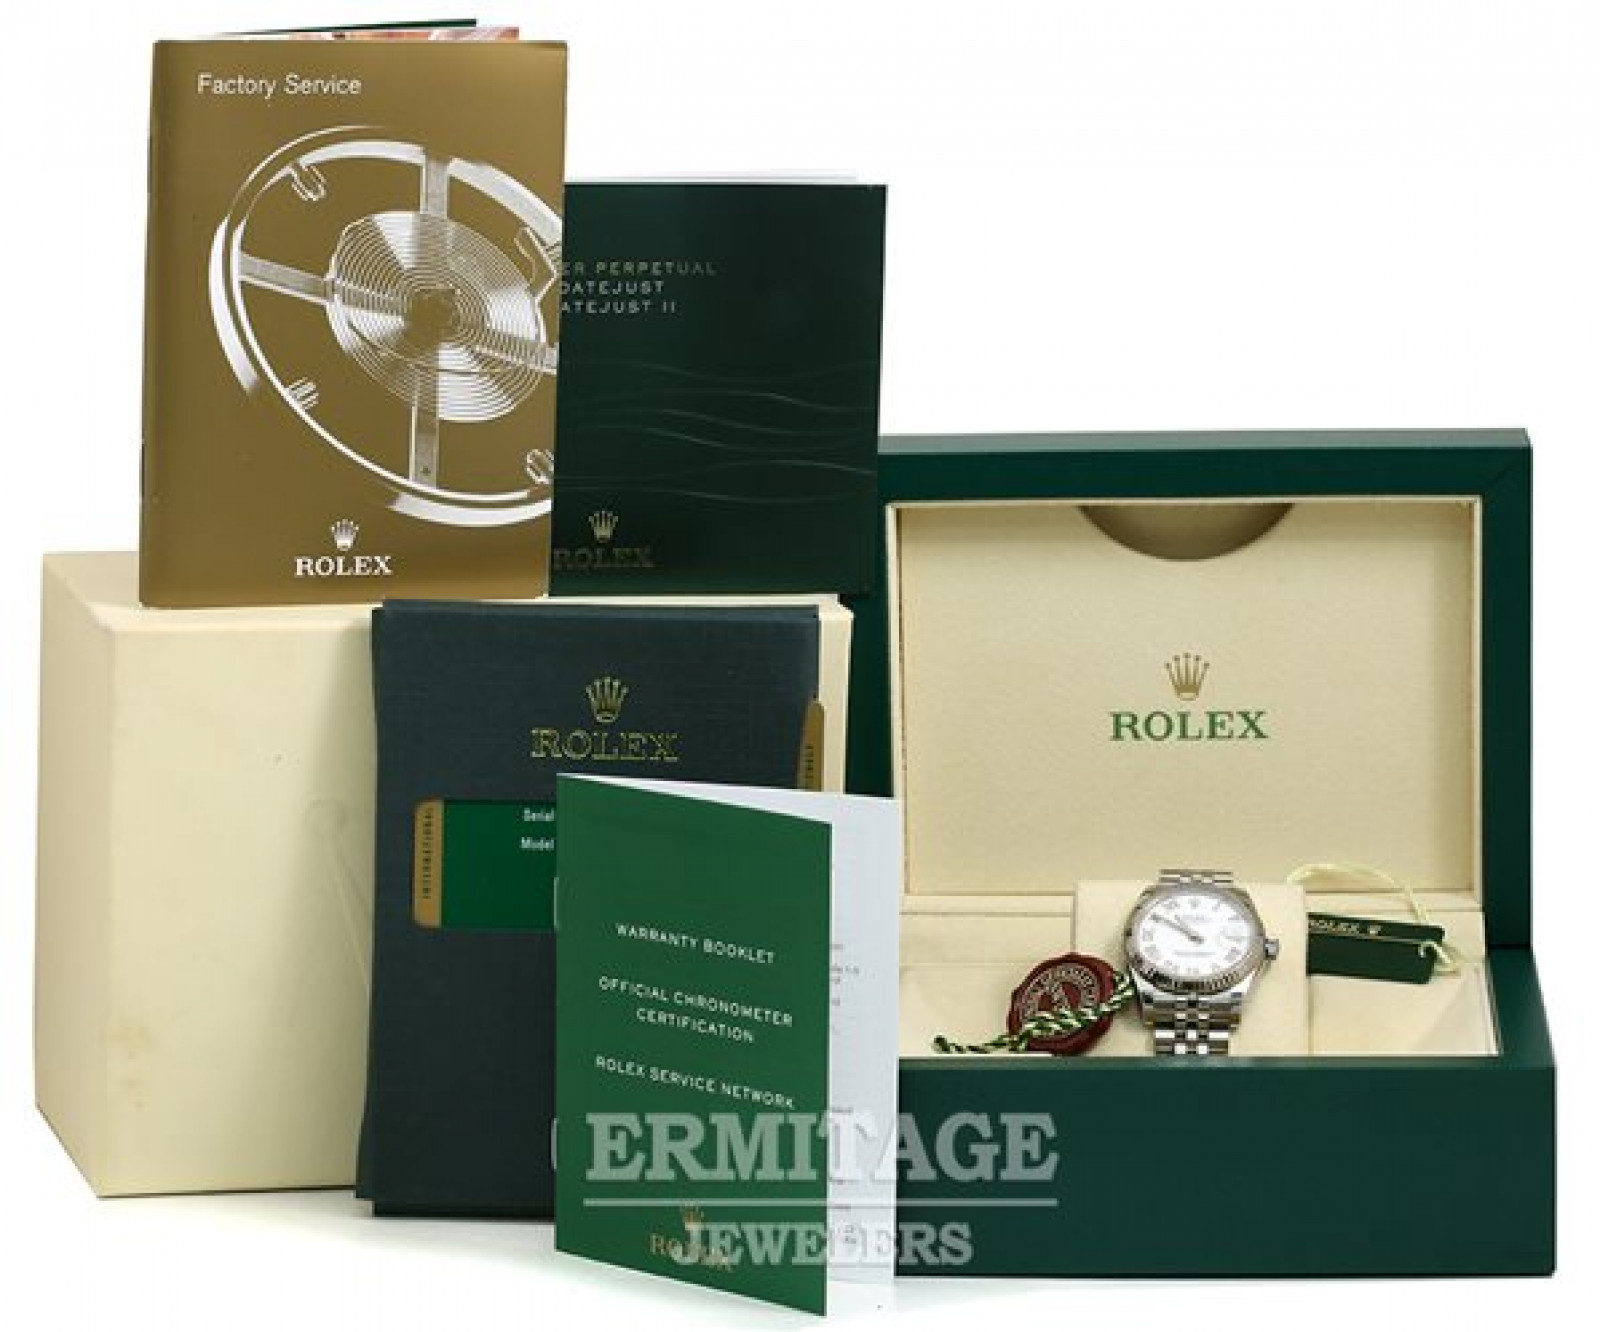 Rolex Datejust 178274 Steel with White Dial & Roman Markers